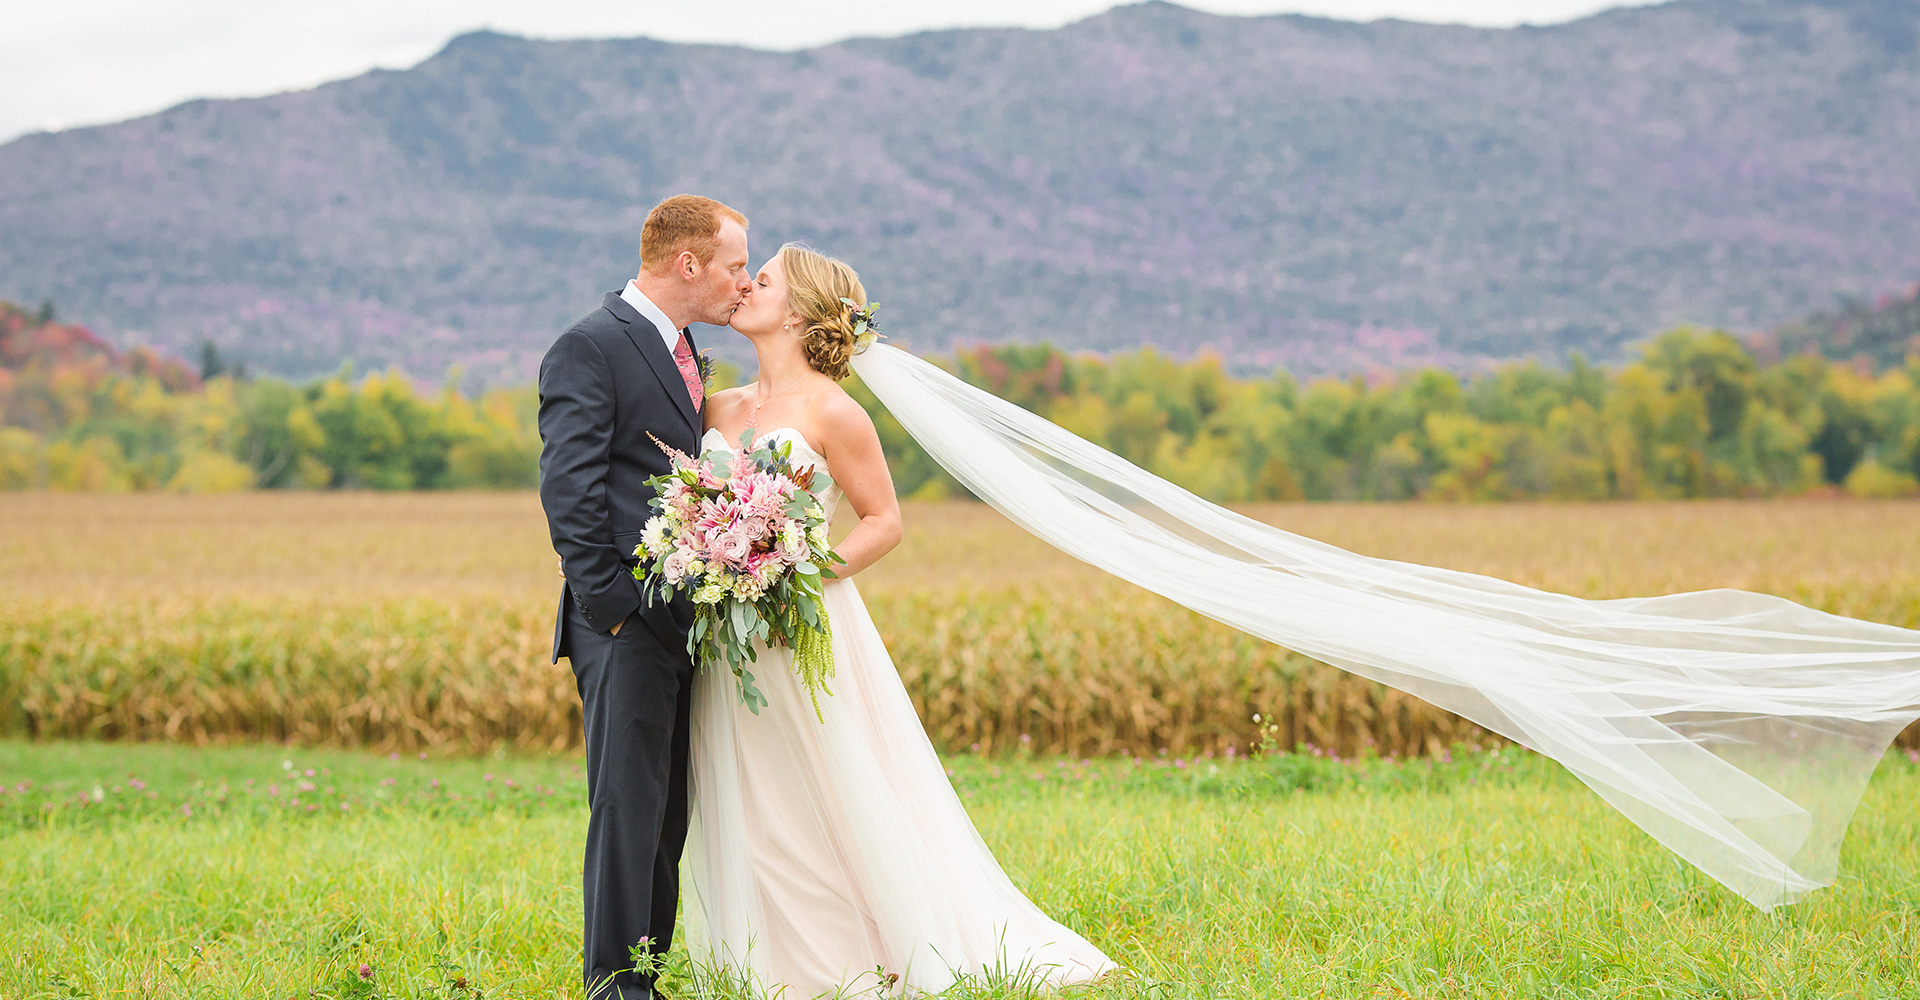 Bride and groom kissing at their Vermont wedding venue with fall foliage and mountains in the background.